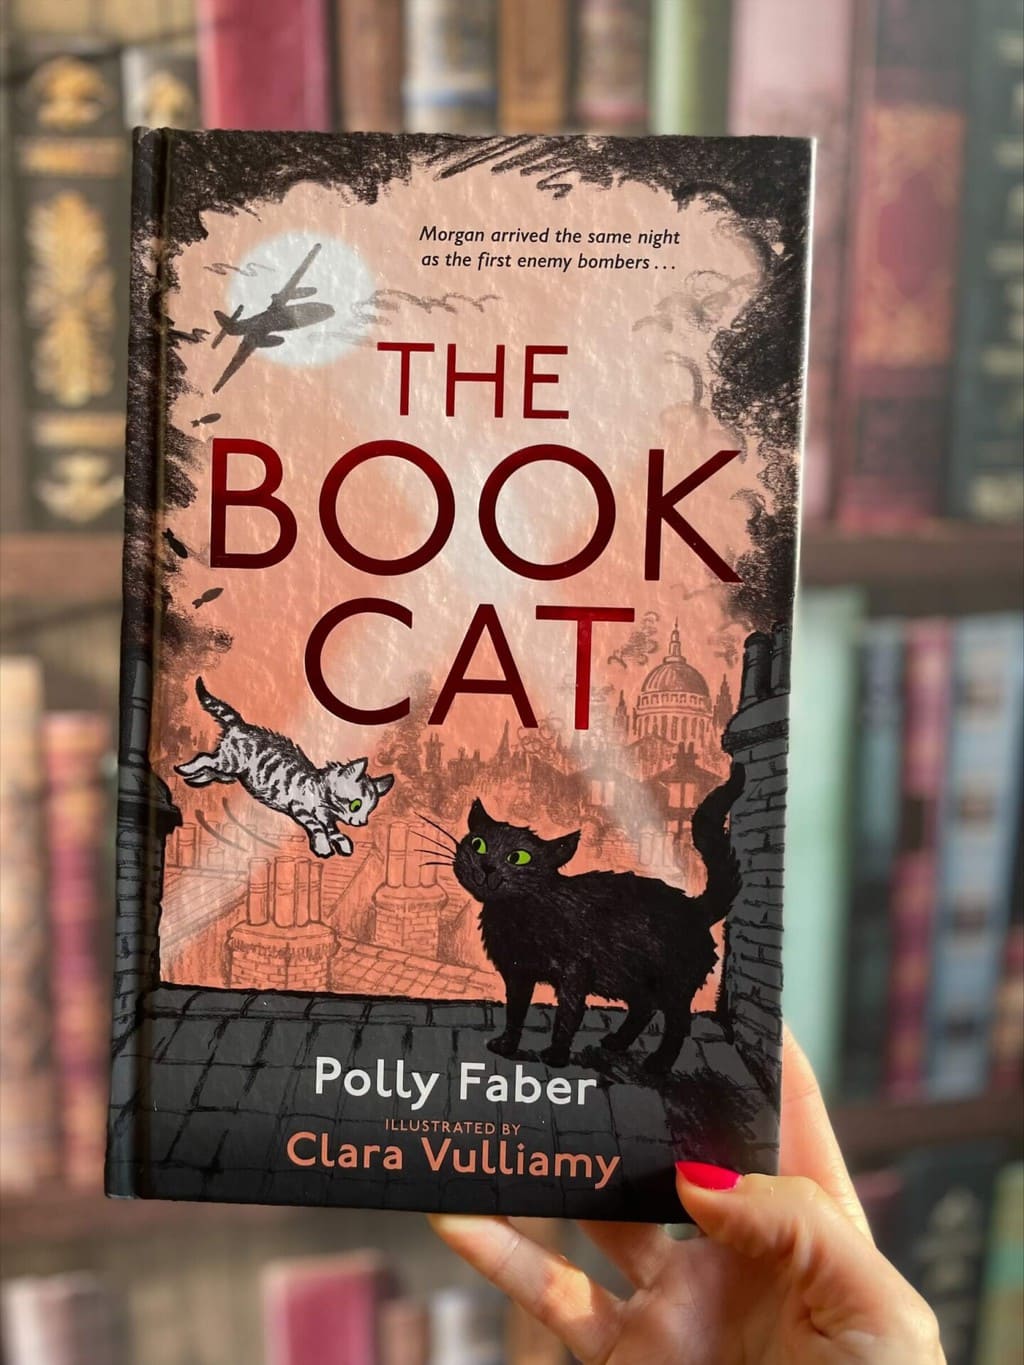 The Book Cat – Polly Faber (author), Clare Vulliamy (illustrator) – Faber and Faber (publisher)